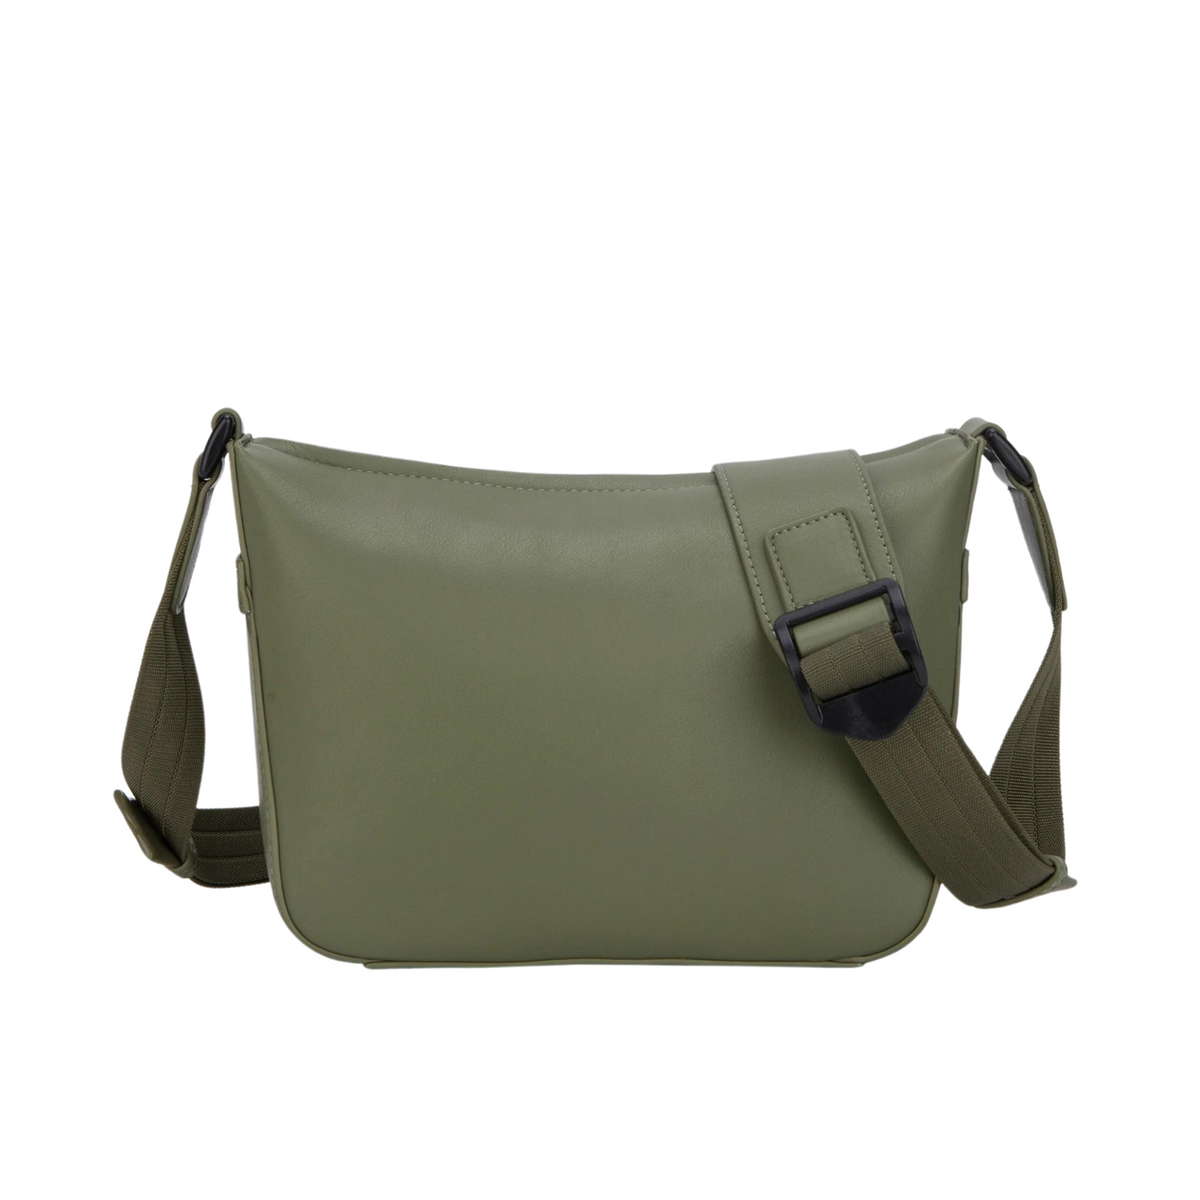 TRACK SMALL SOFT STRUCTURE BAG - GREEN LAND